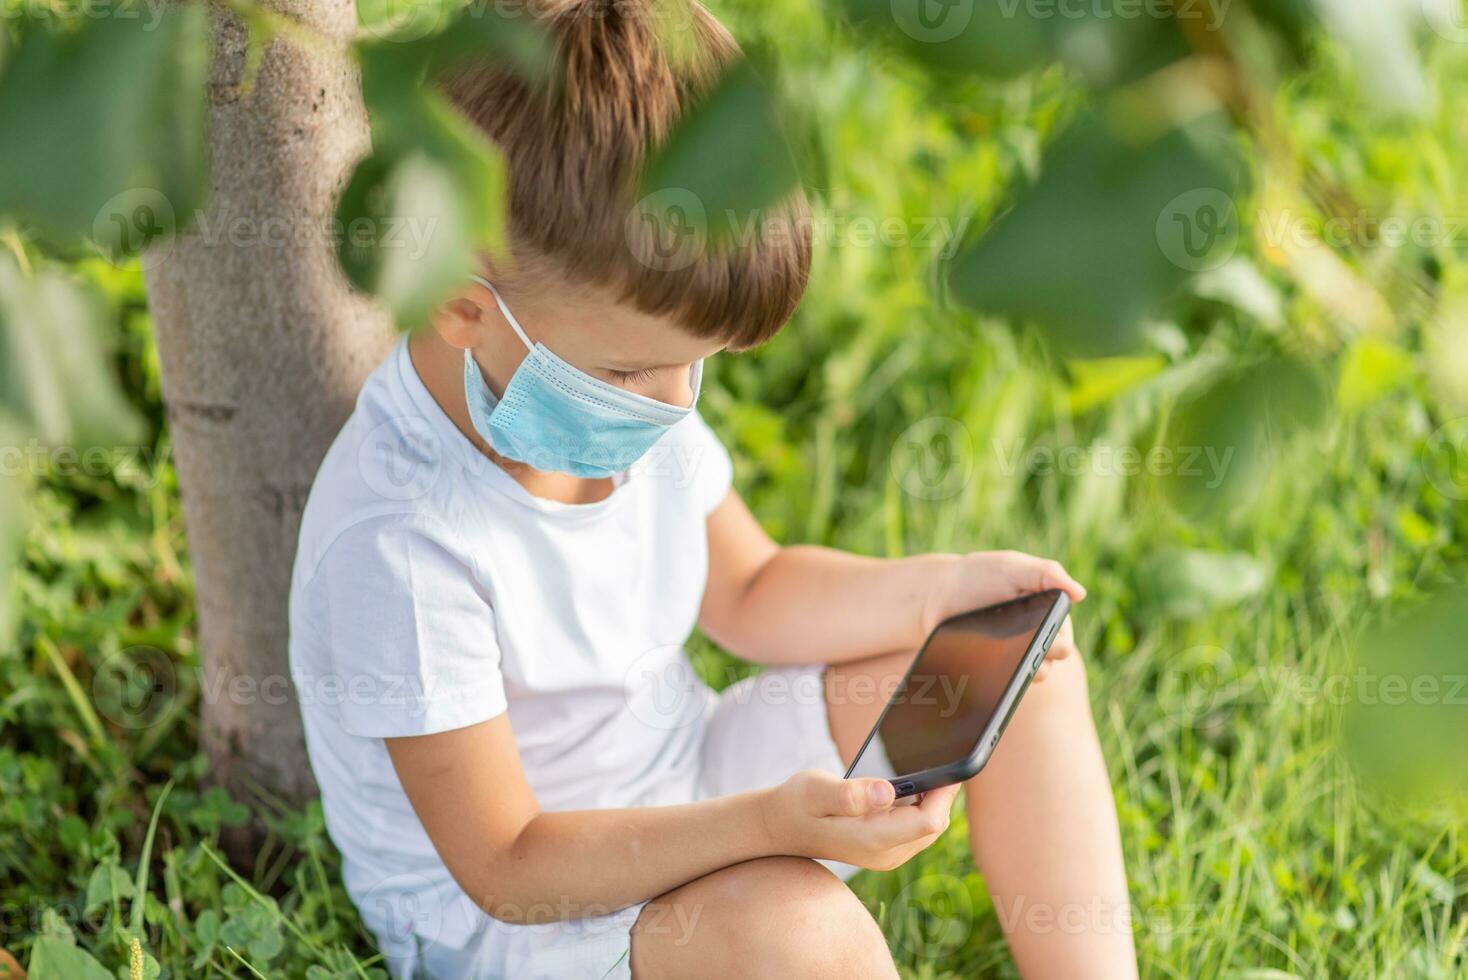 A kid in a medical mask sits on the grass and looks in the phone cartoons in the summer at sunset. Child with a mobile phone in his hands. Prevention against coronavirus Covid-19 during a pandemic photo